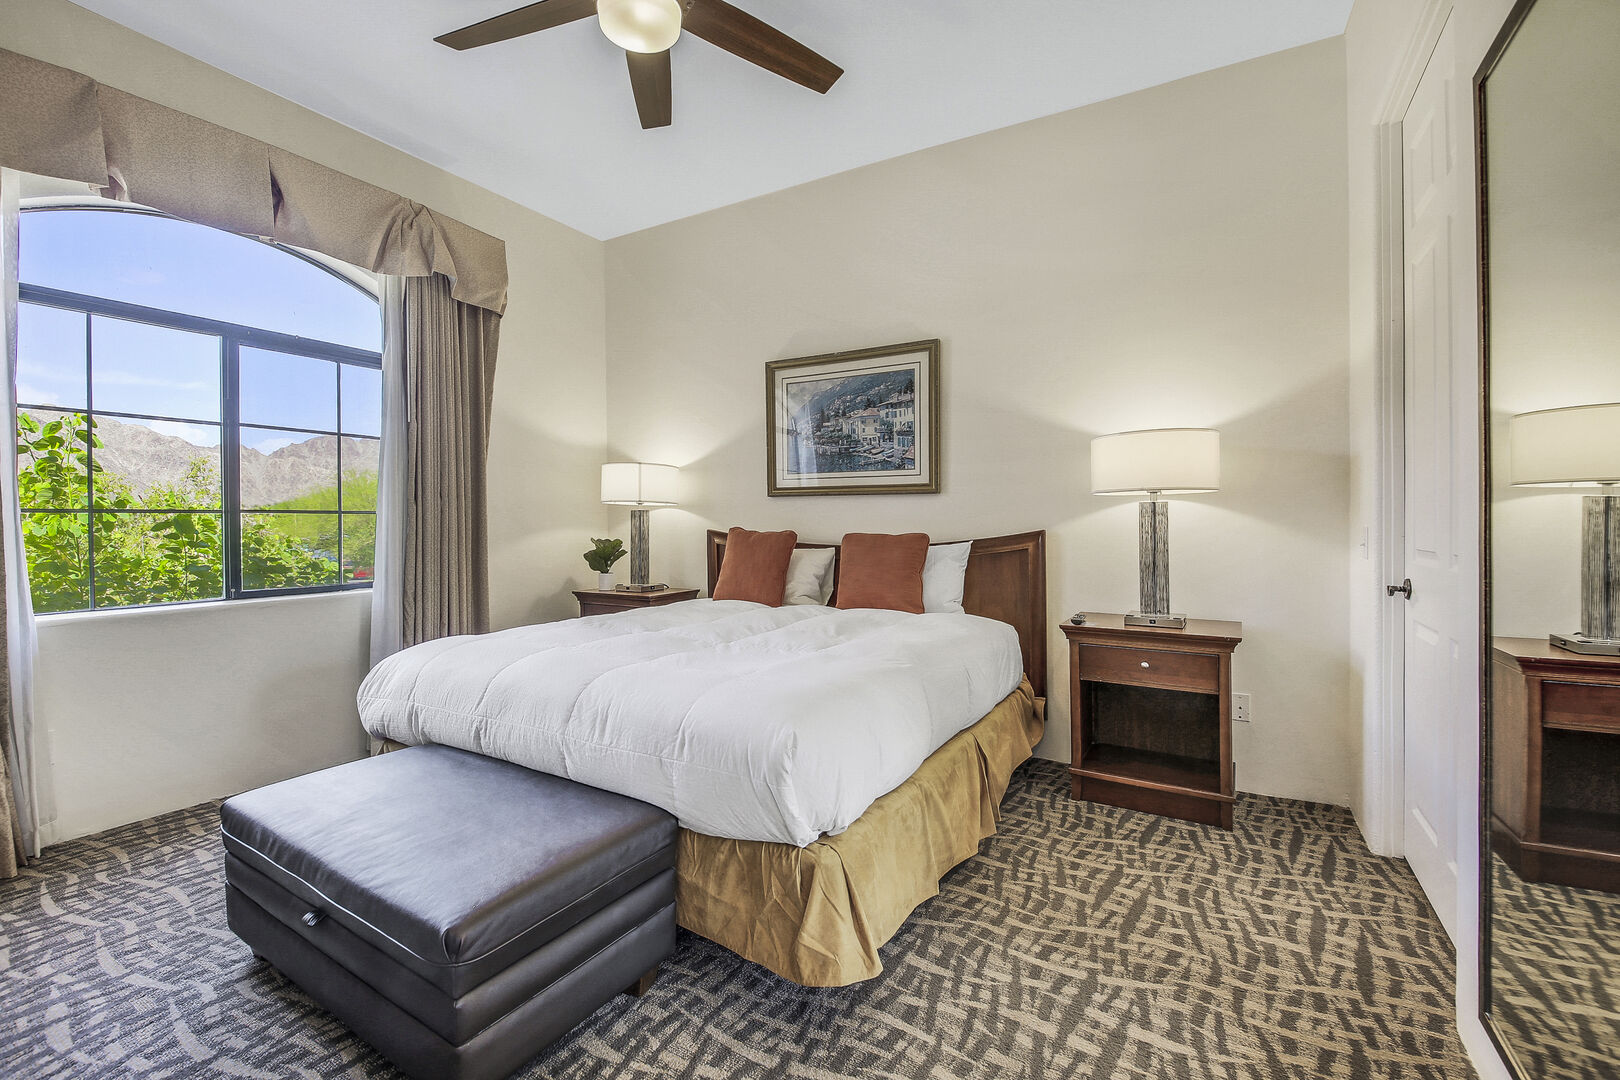 Master Suite 1 features King-sized Bed, 55-inch Samsung Smart television.